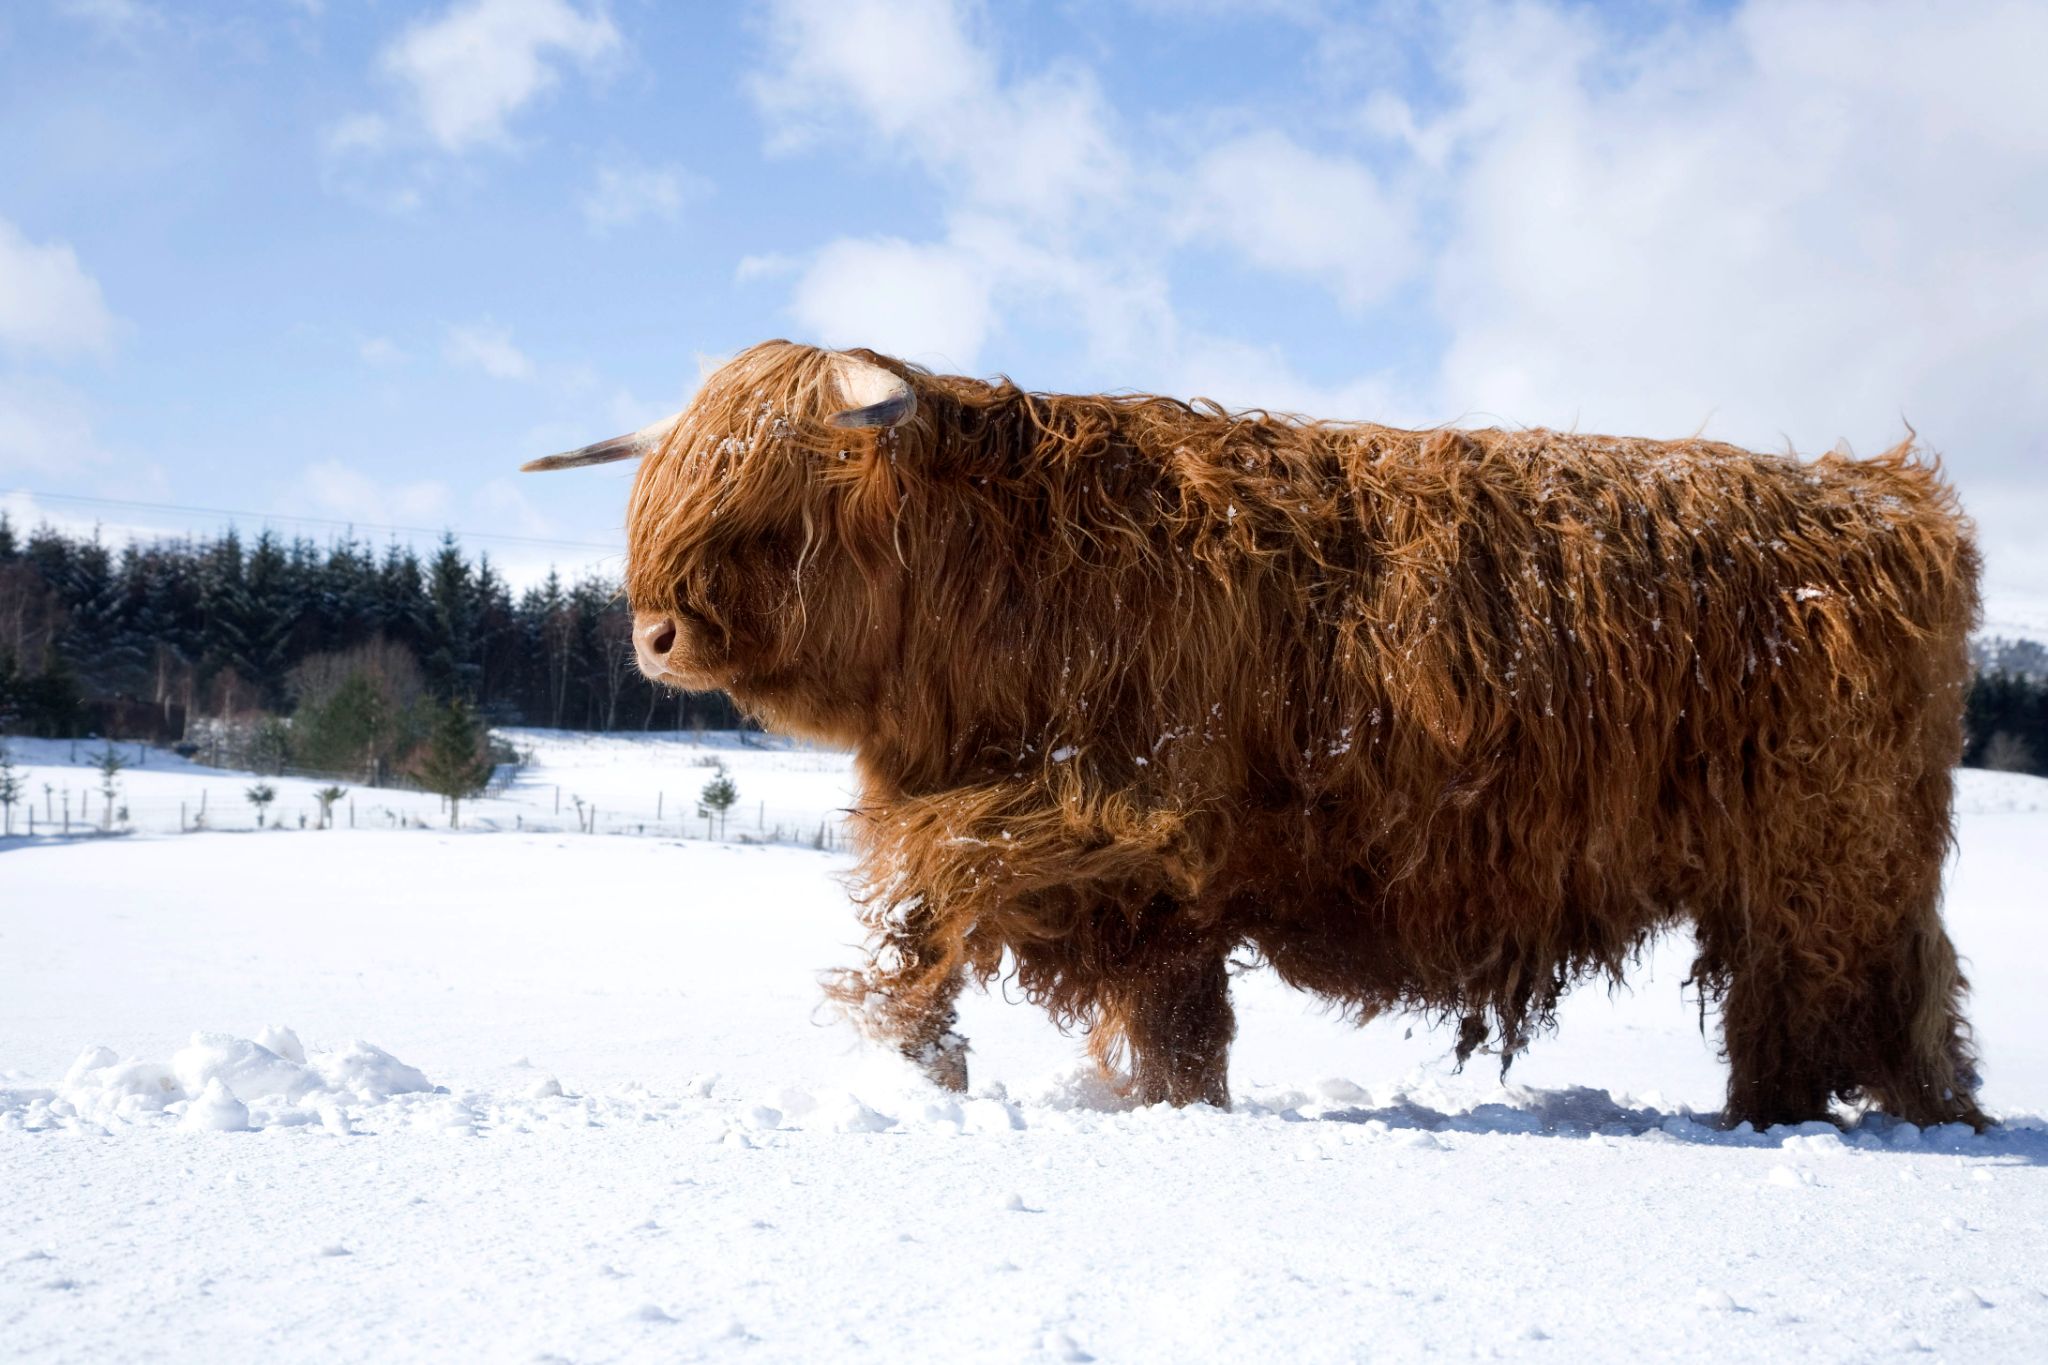 https://2f1a7f9478.visitscotland.net/binaries/content/gallery/visitscotland/cms-images/2023/06/06/highland-cow-in-the-snow-near-inverurie.jpg